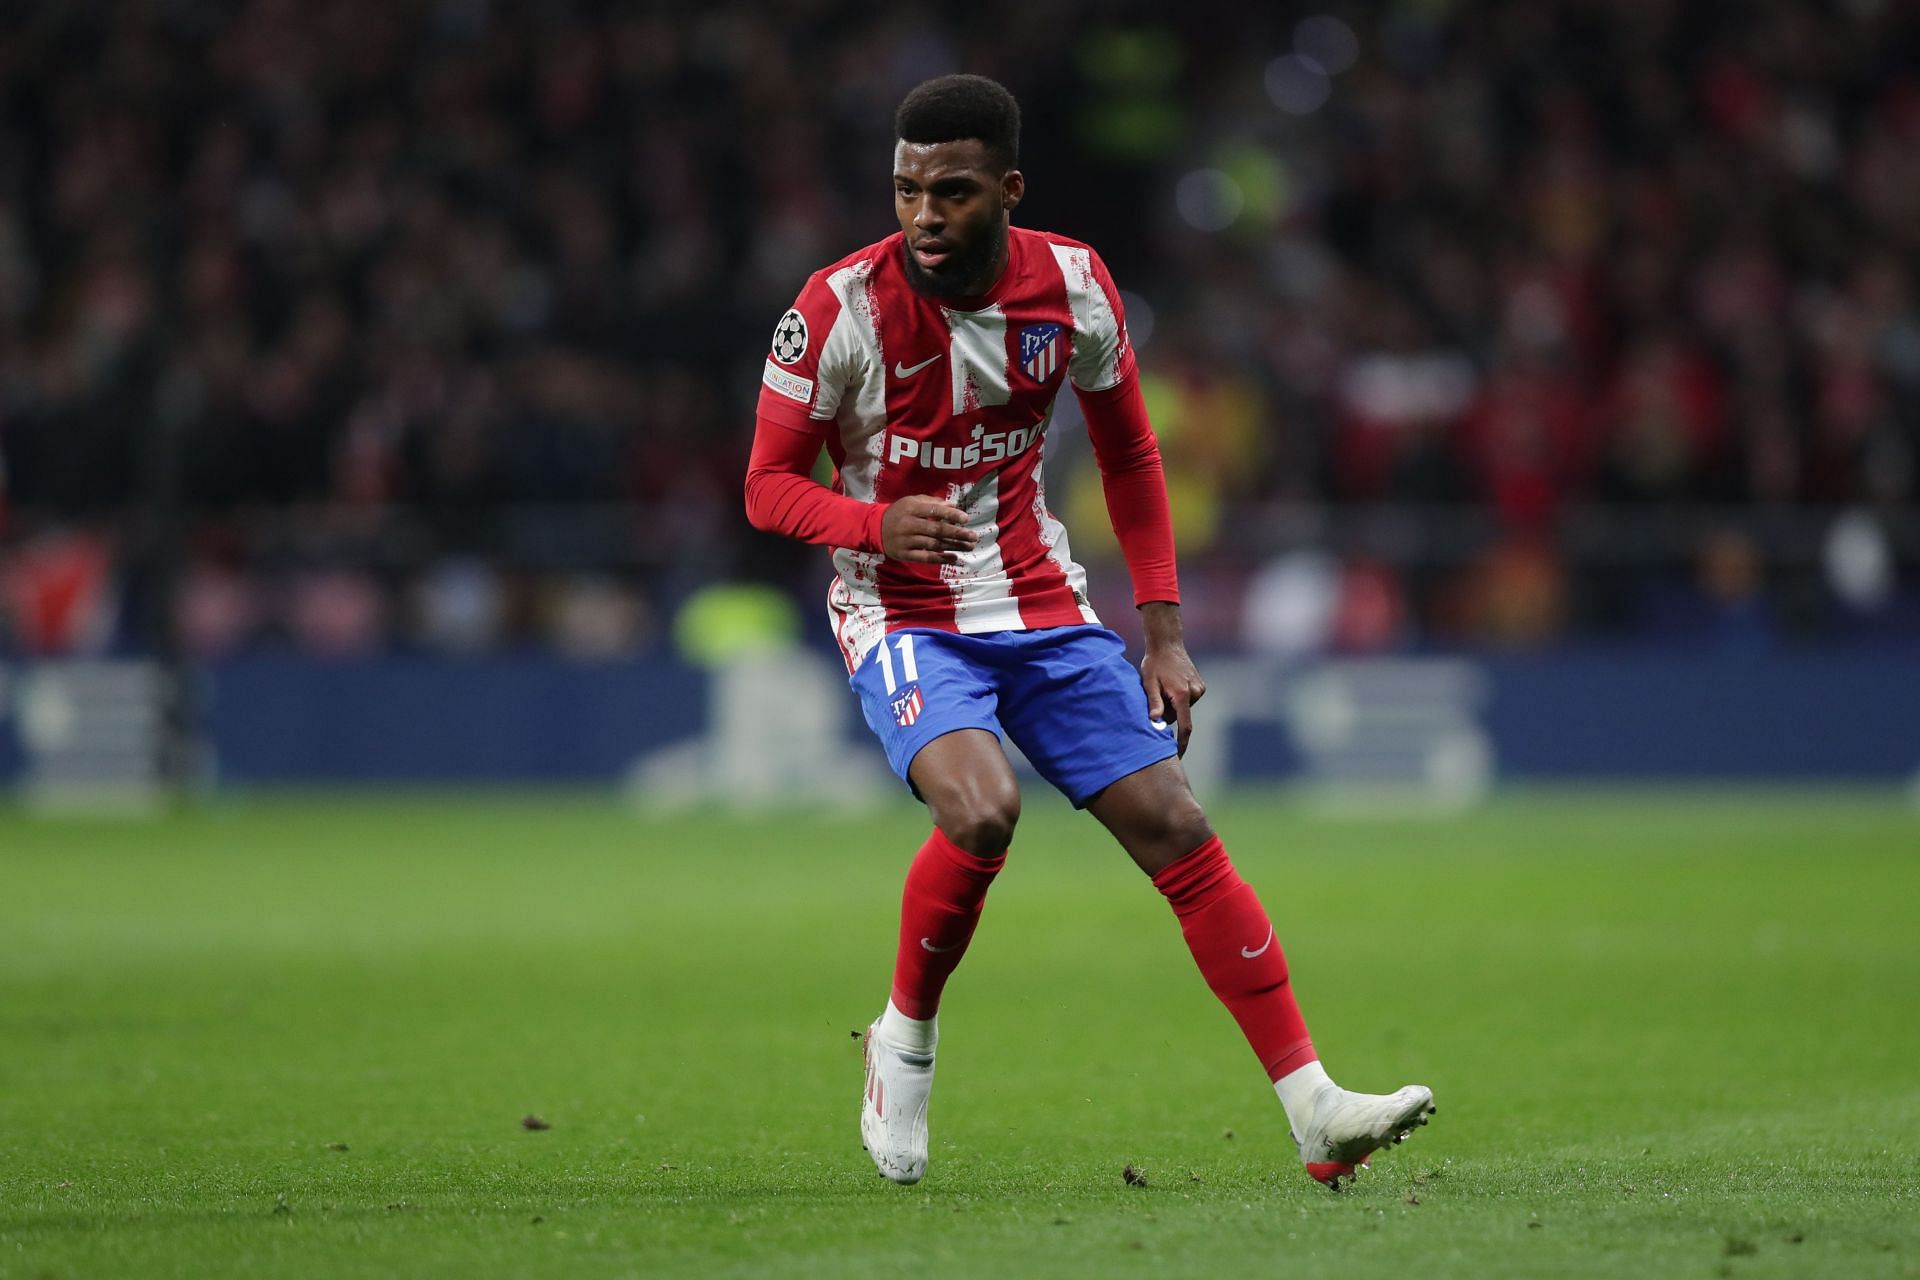 Arsenal are locked in battle with Manchester United for Thomas Lemar.